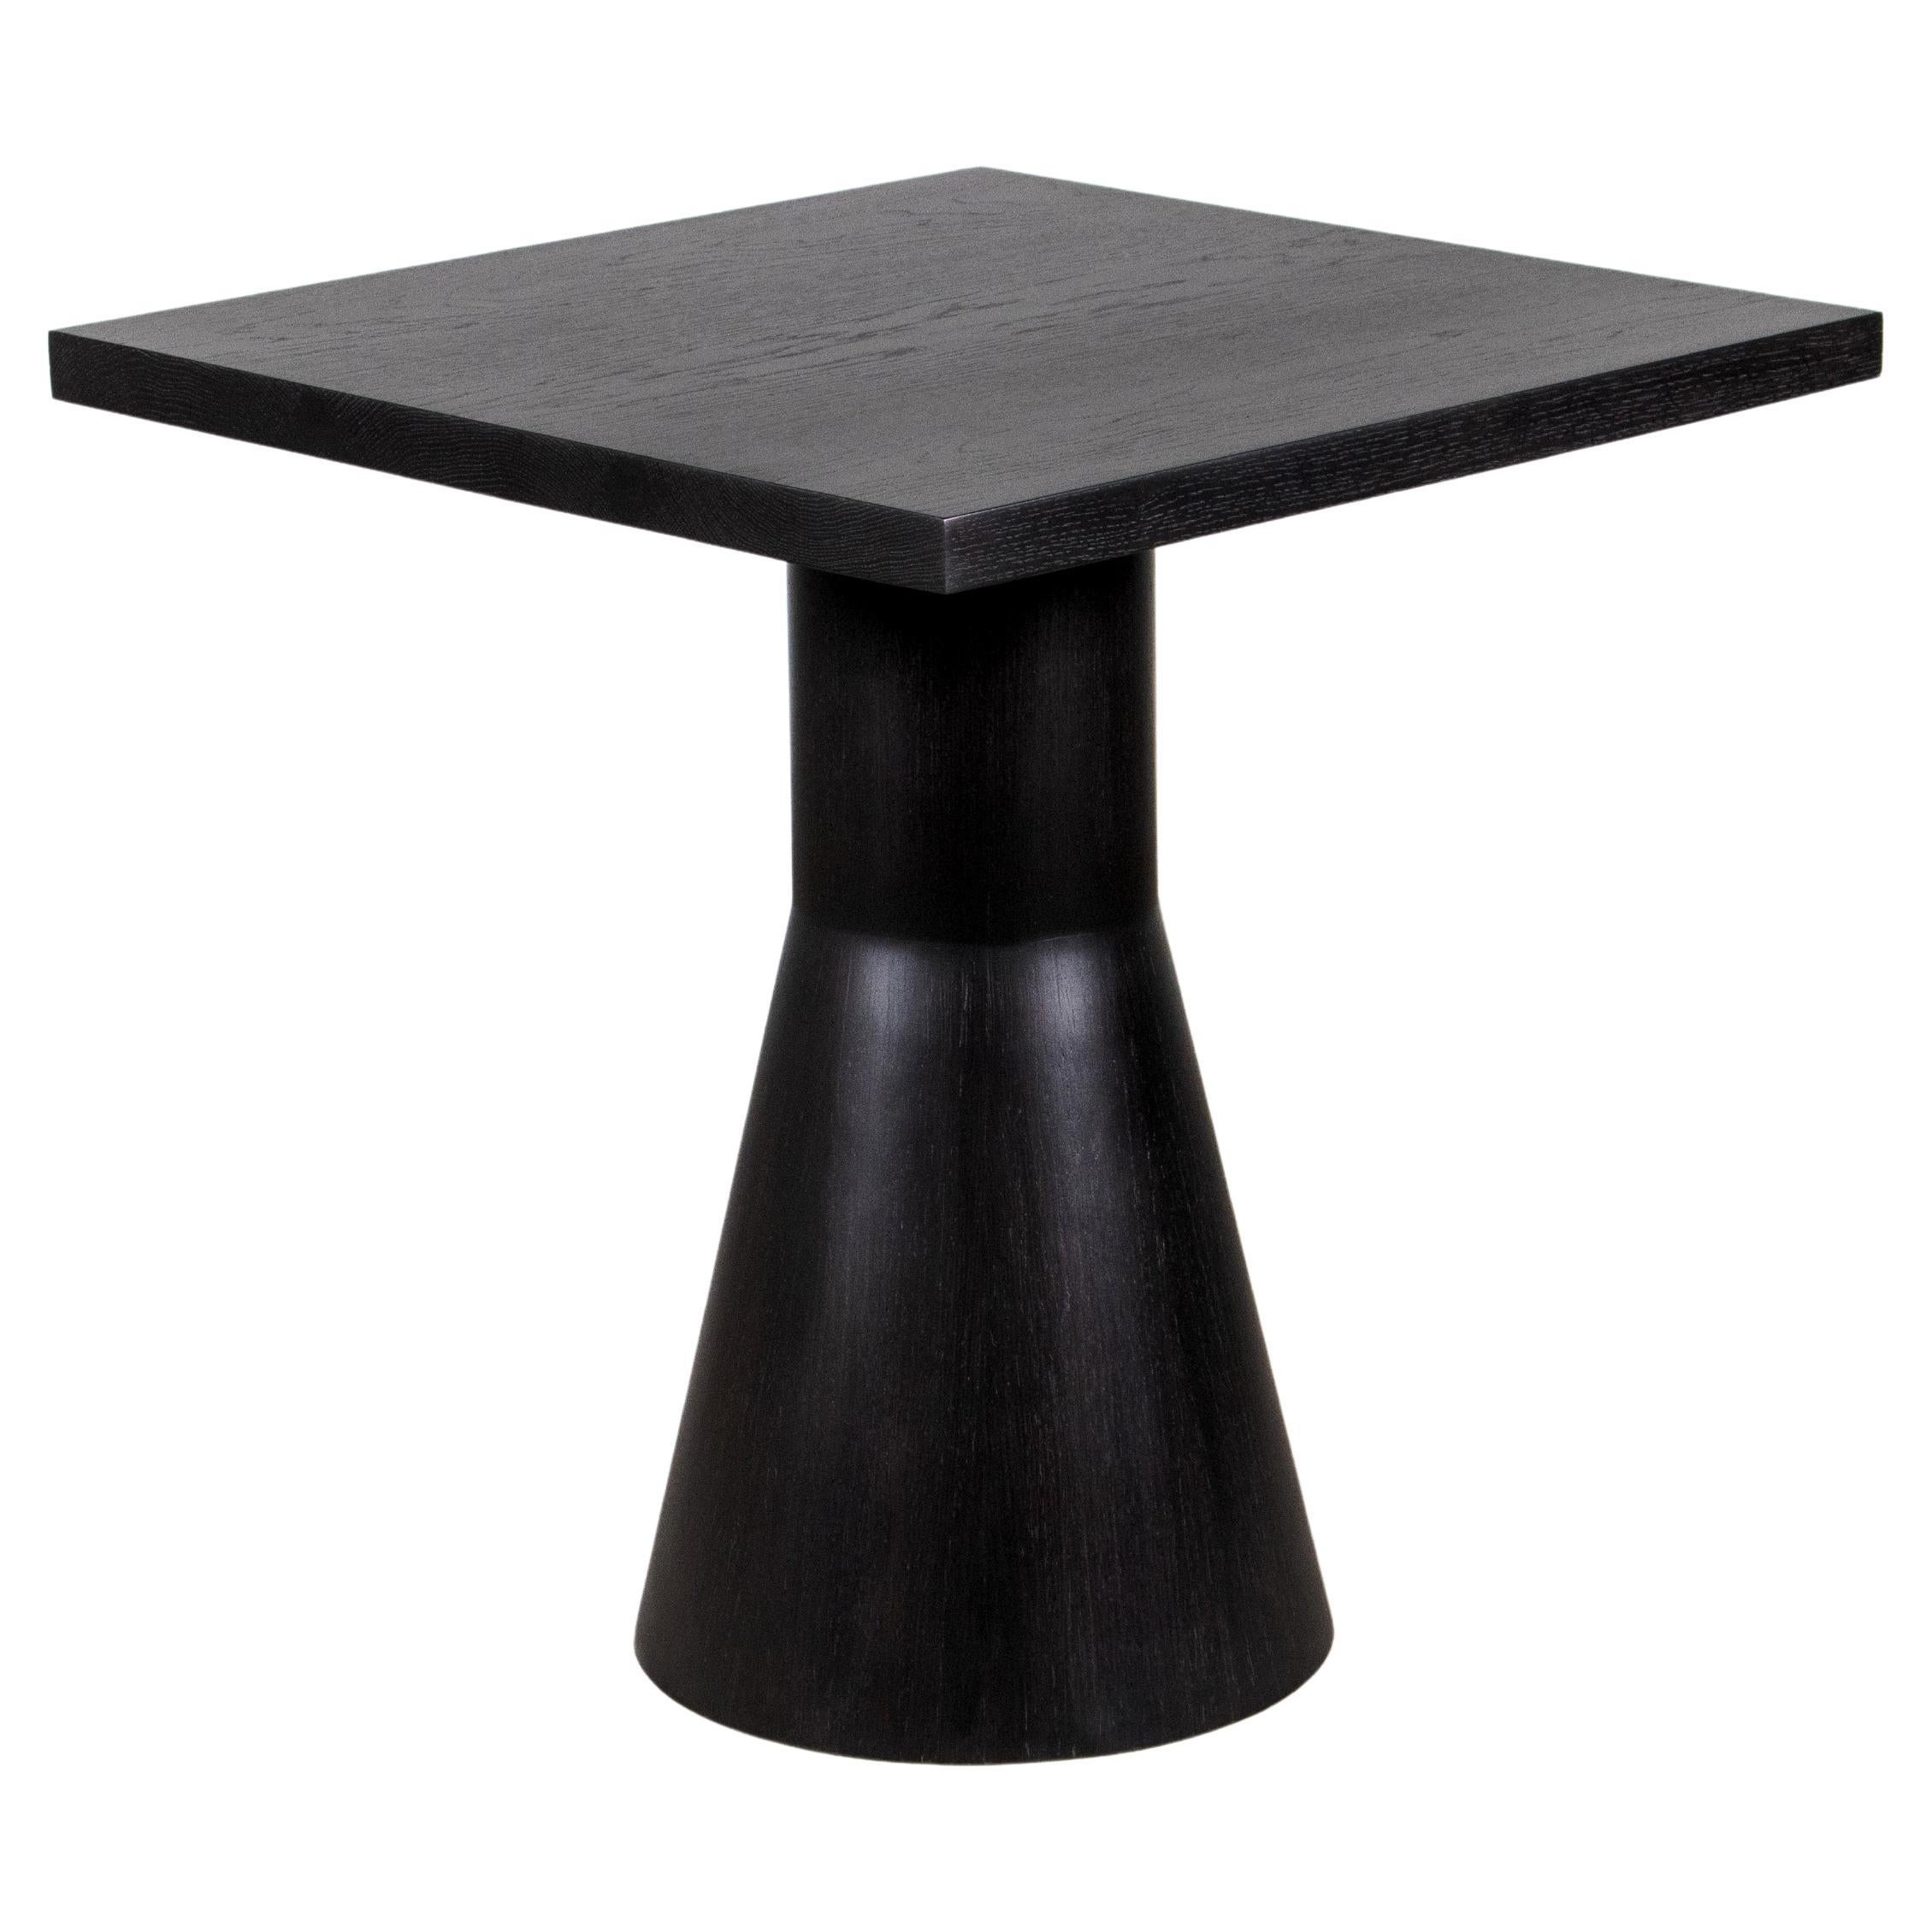 Ebonized Oak Modern Wood Black Square Dining Table by Costantini, Serena For Sale